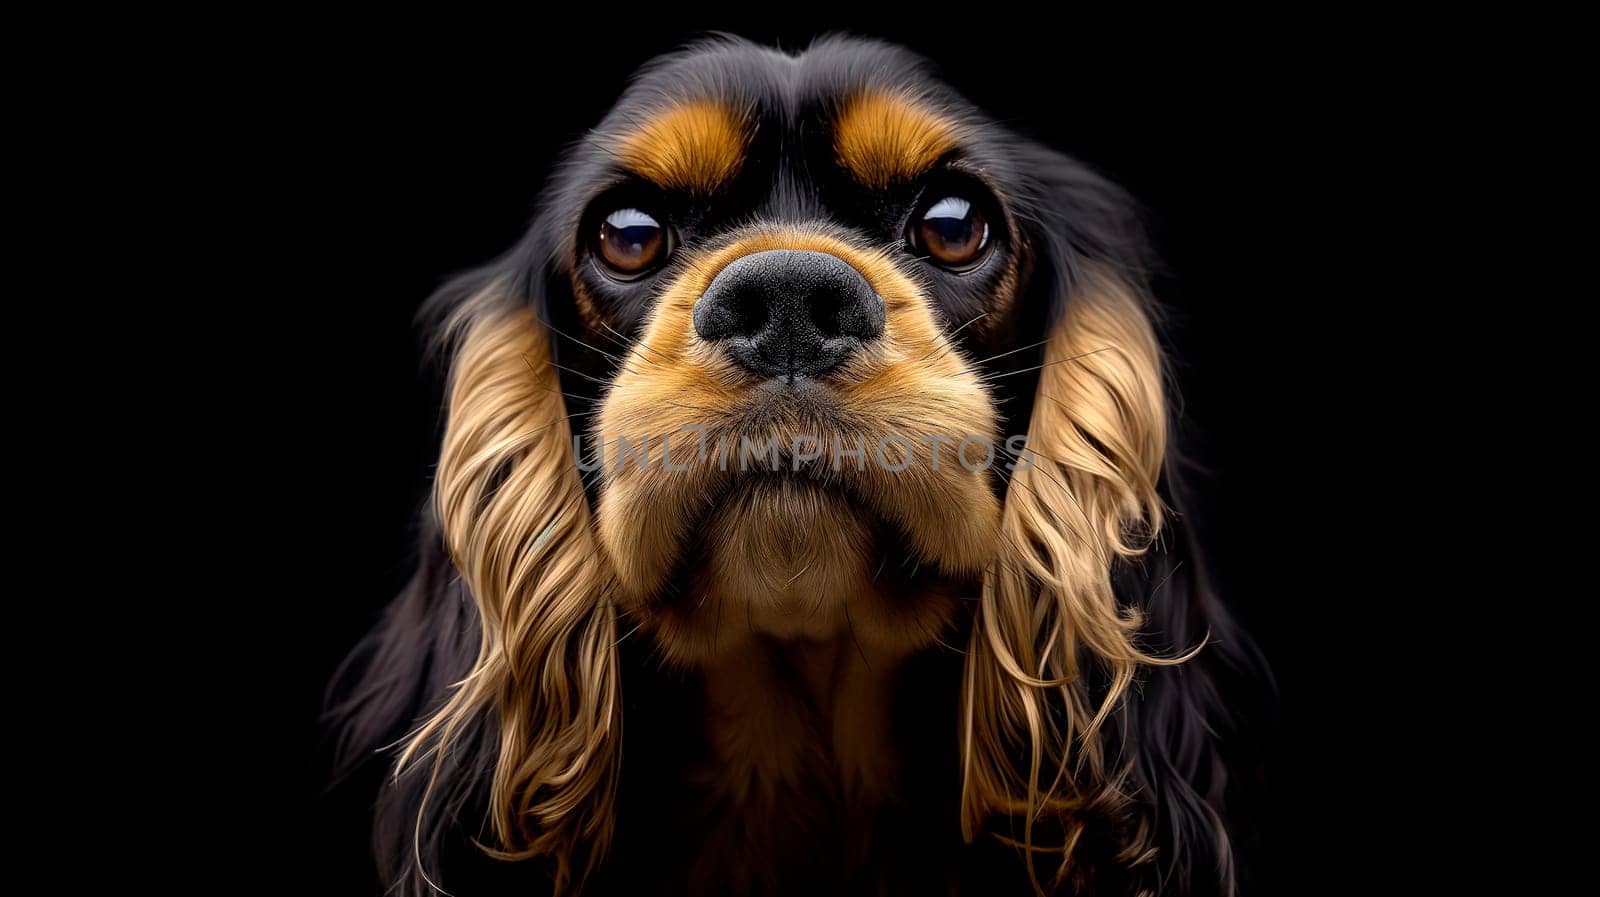 Close-Up Portrait of a Cavalier King Charles Spaniel Against Black Background by chrisroll